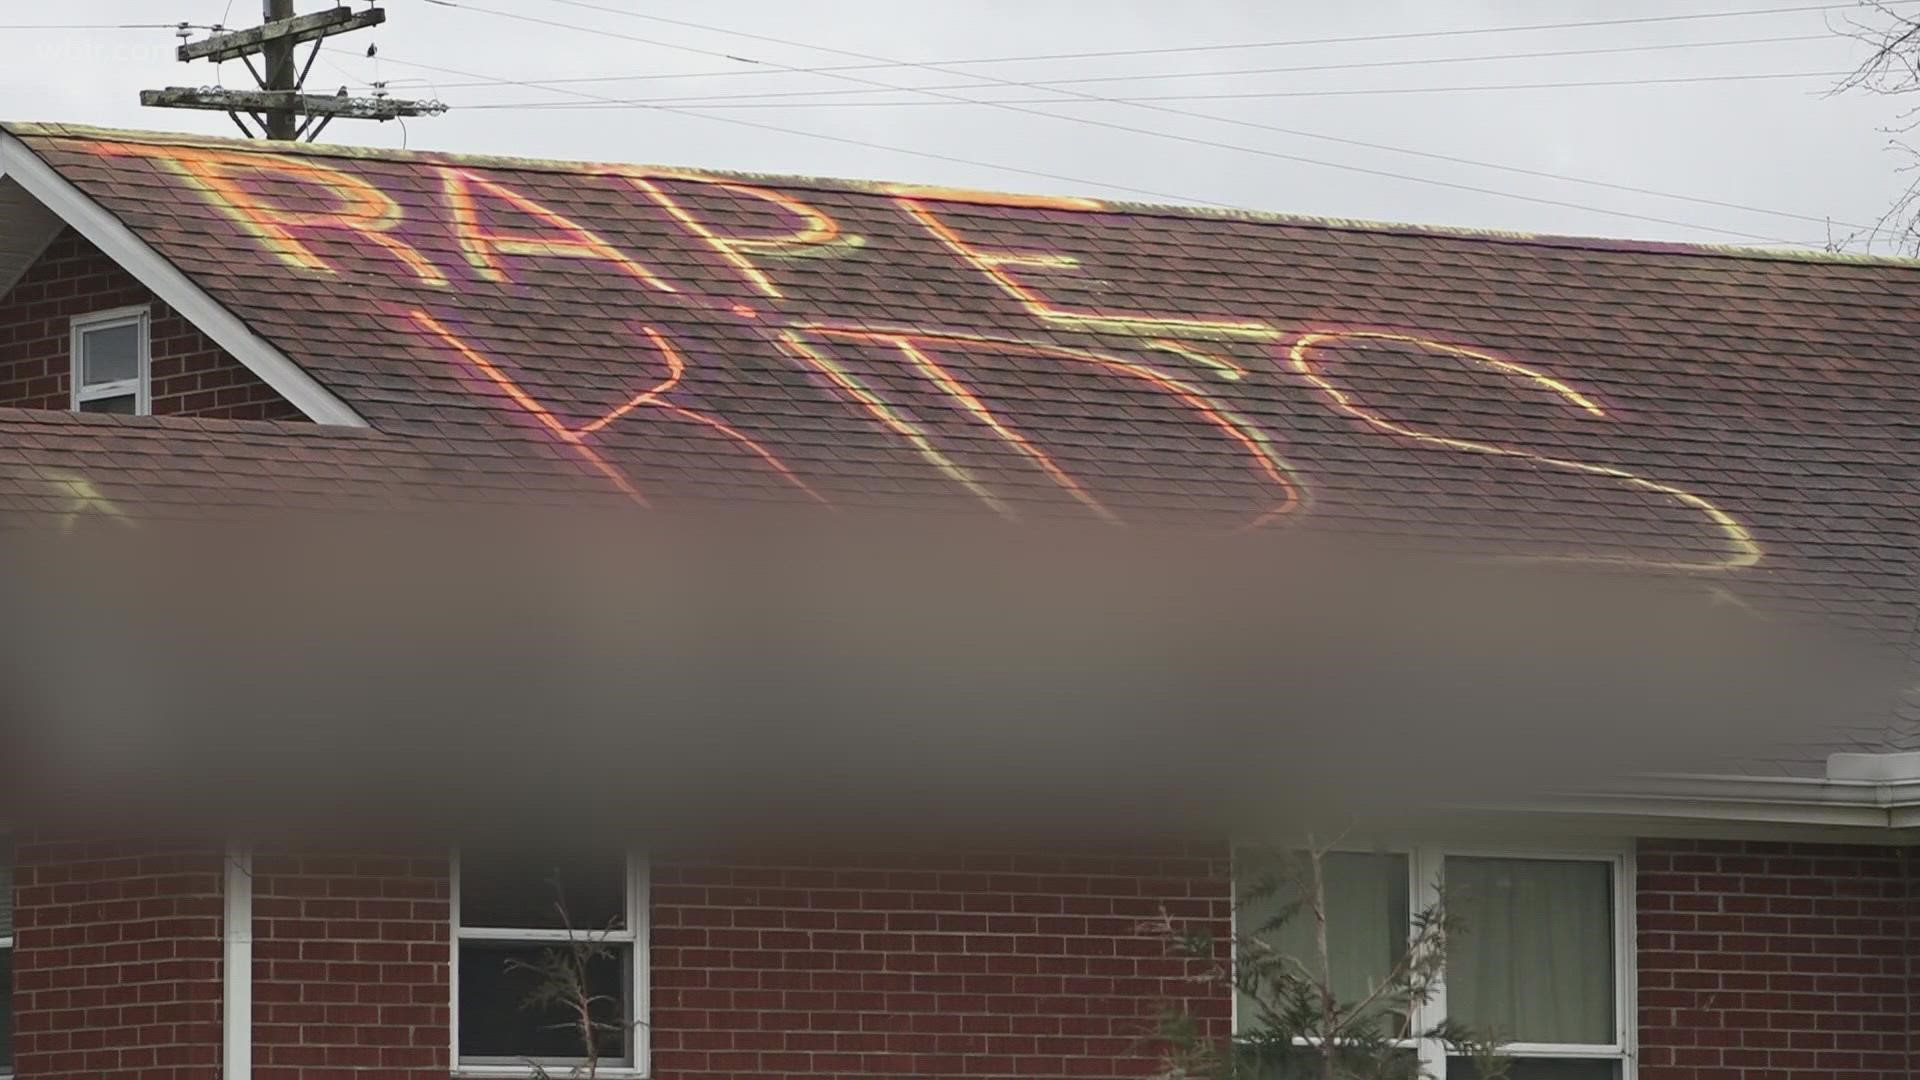 Darrel Chadima wrote "rape kids" in chalk on his roof last year, and included his phone number.